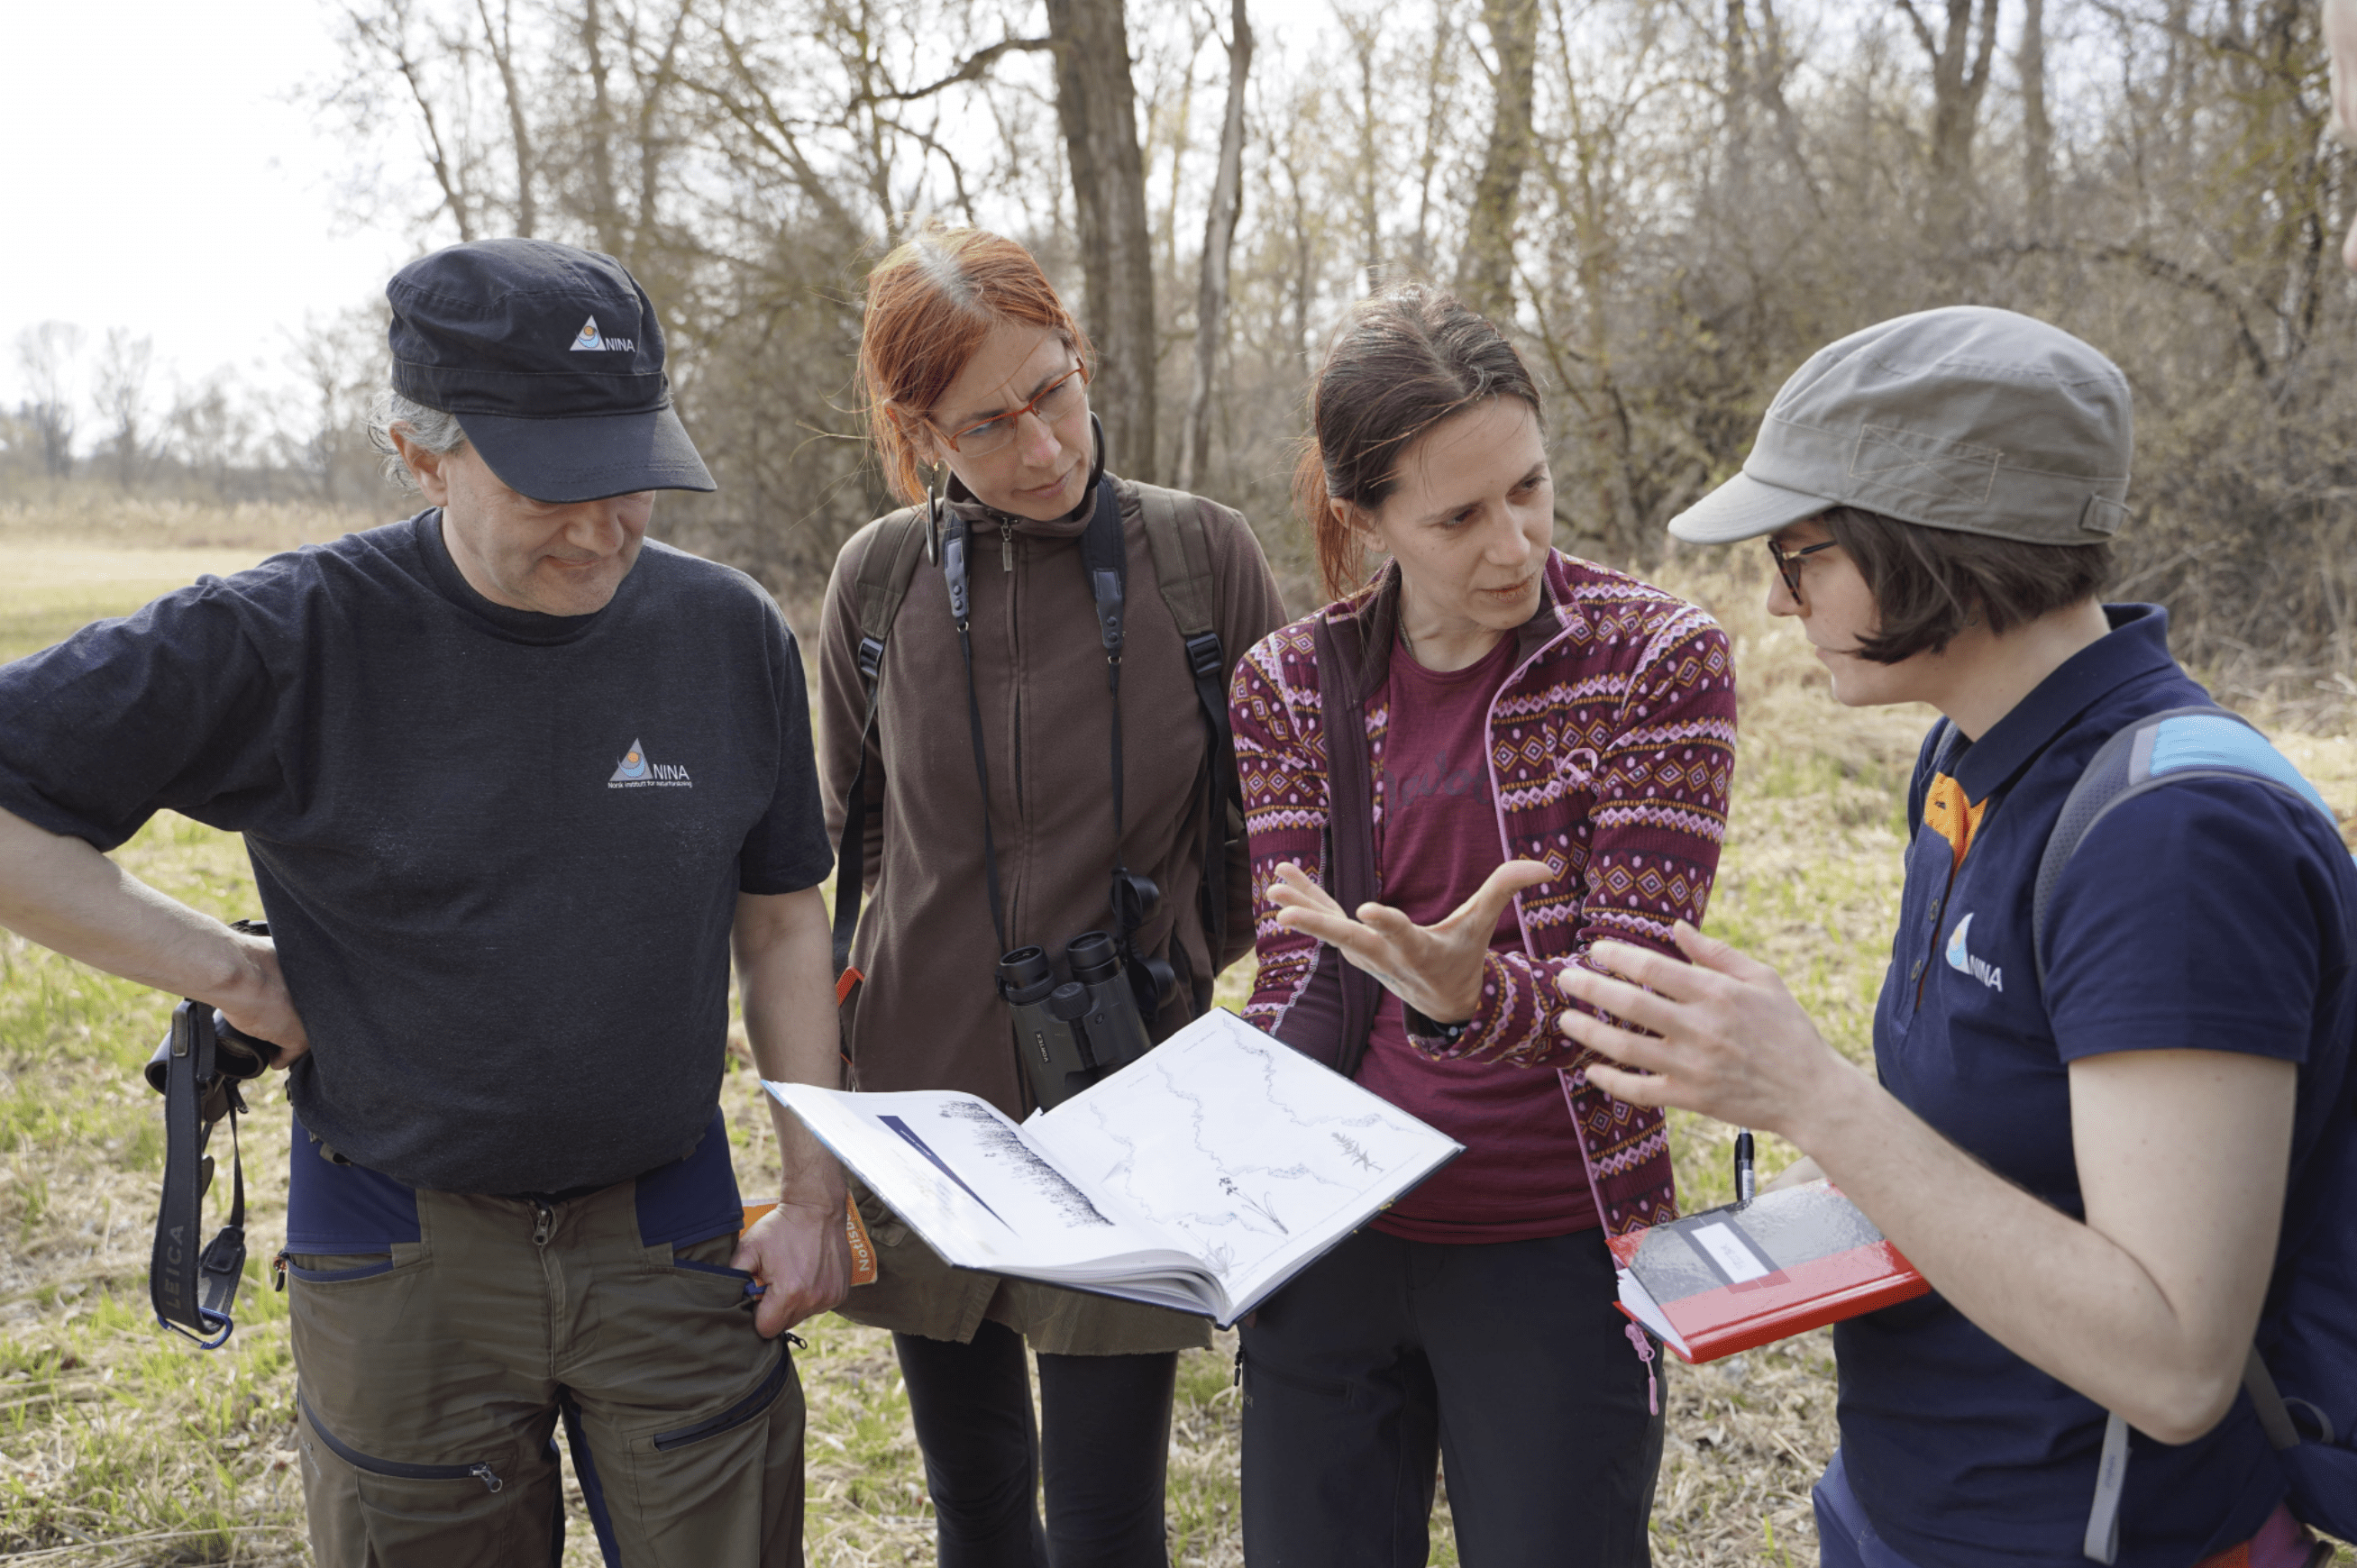  Duncan Halley and Anne C Mehlhoop (on the left), from the Norwegian Institute for Nature Research, during one of the project visits with the Slovak partners. Photo credits: Green Foundation 